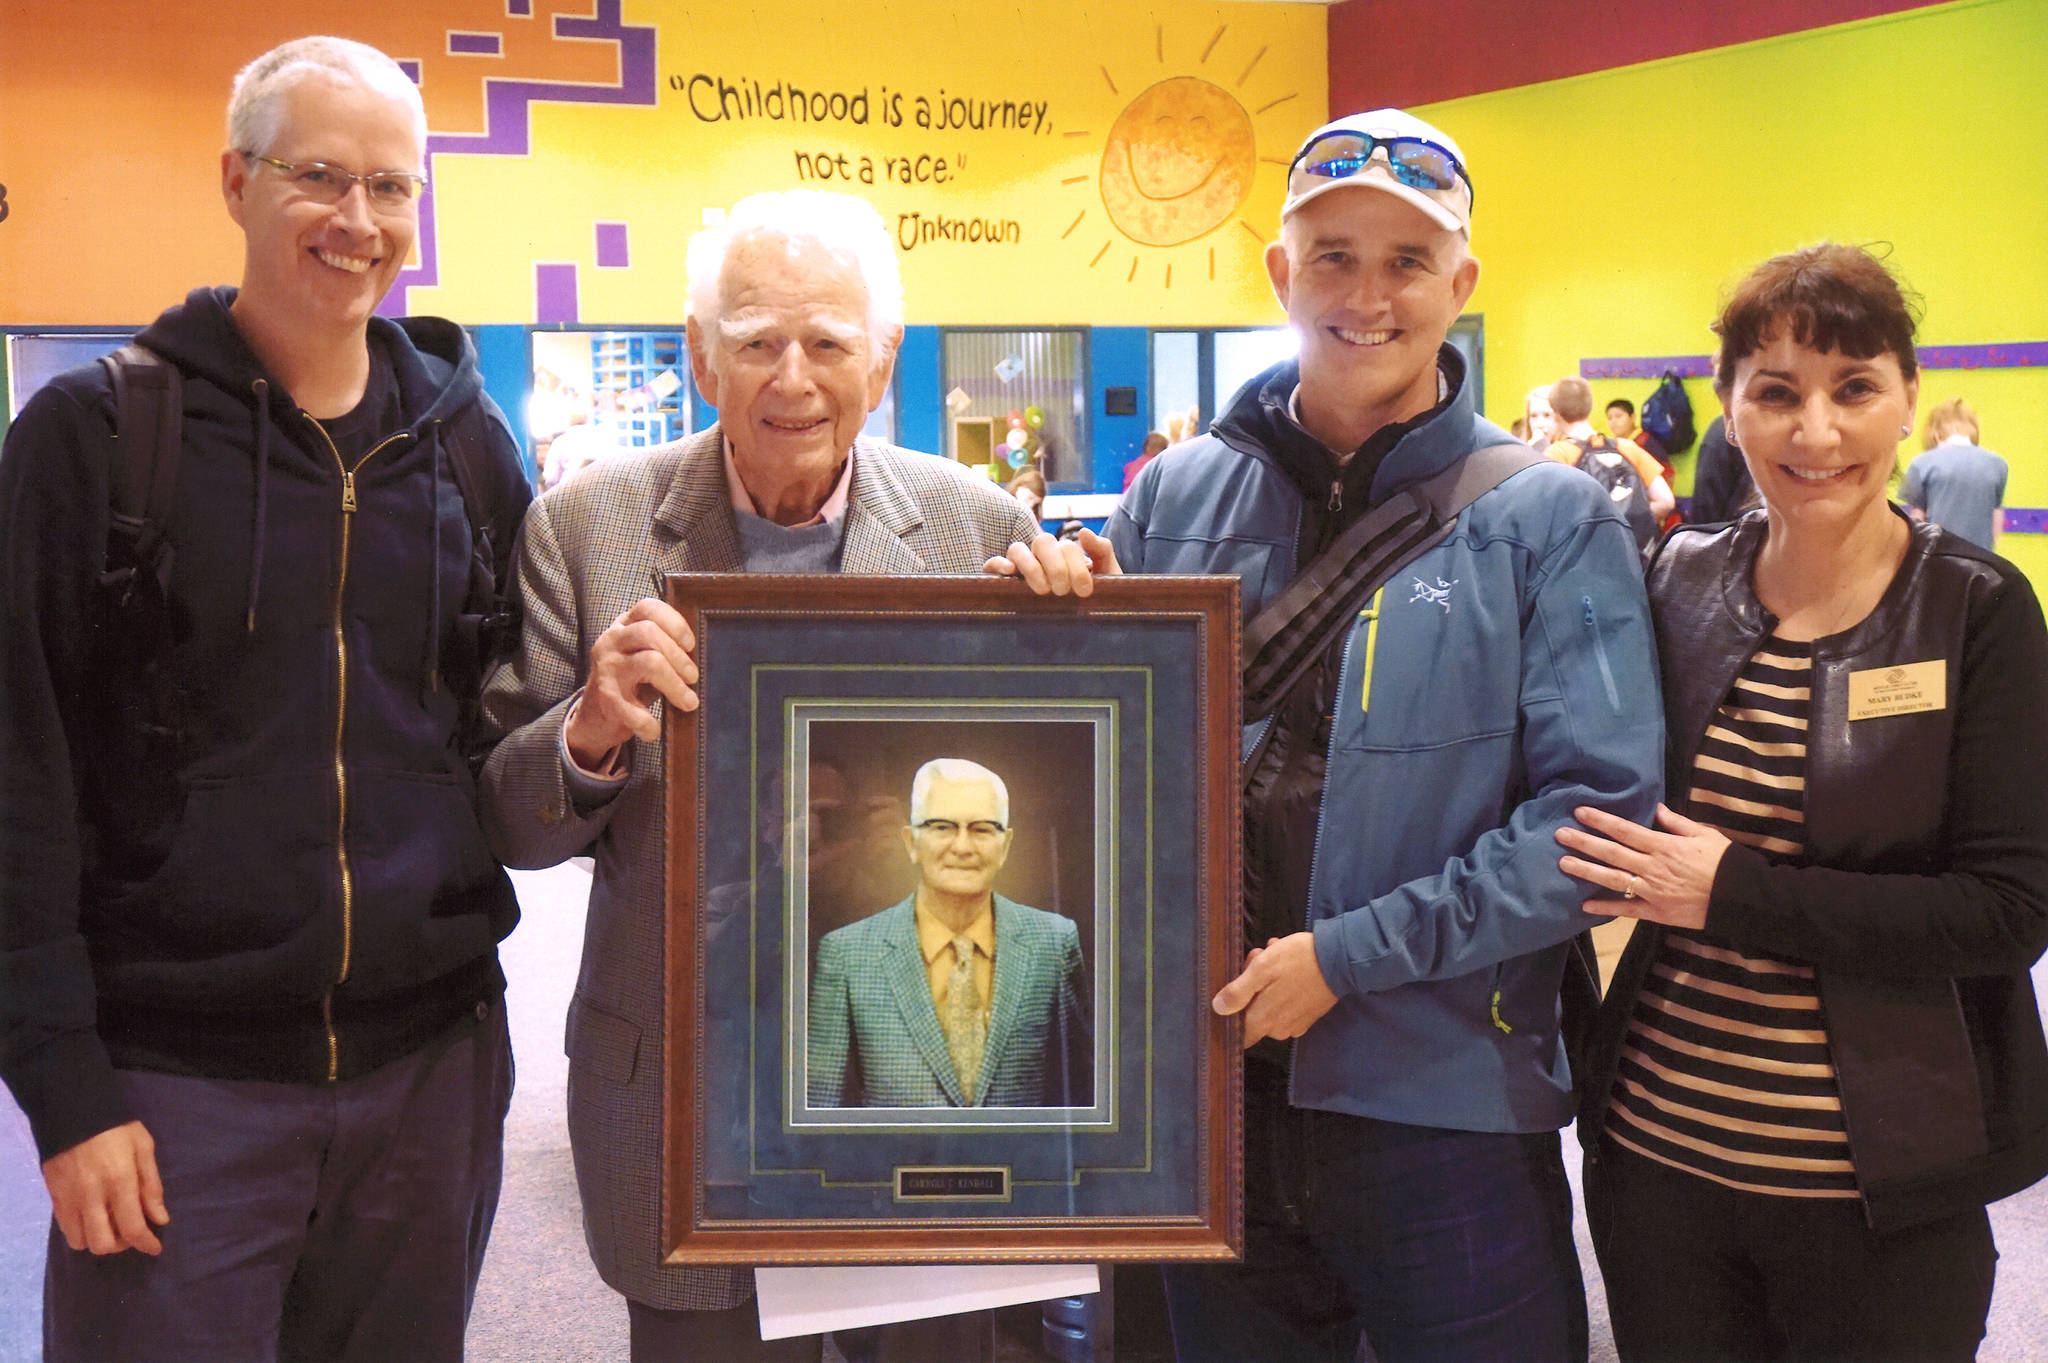 Donald Kendall, second from left, is honored in 2014. His sons Kent, left, and Don Jr., second from right, are joined by Mary Budke, executive director at the Boys & Girls Clubs of the Olympic Peninsula. (Courtesy photo)